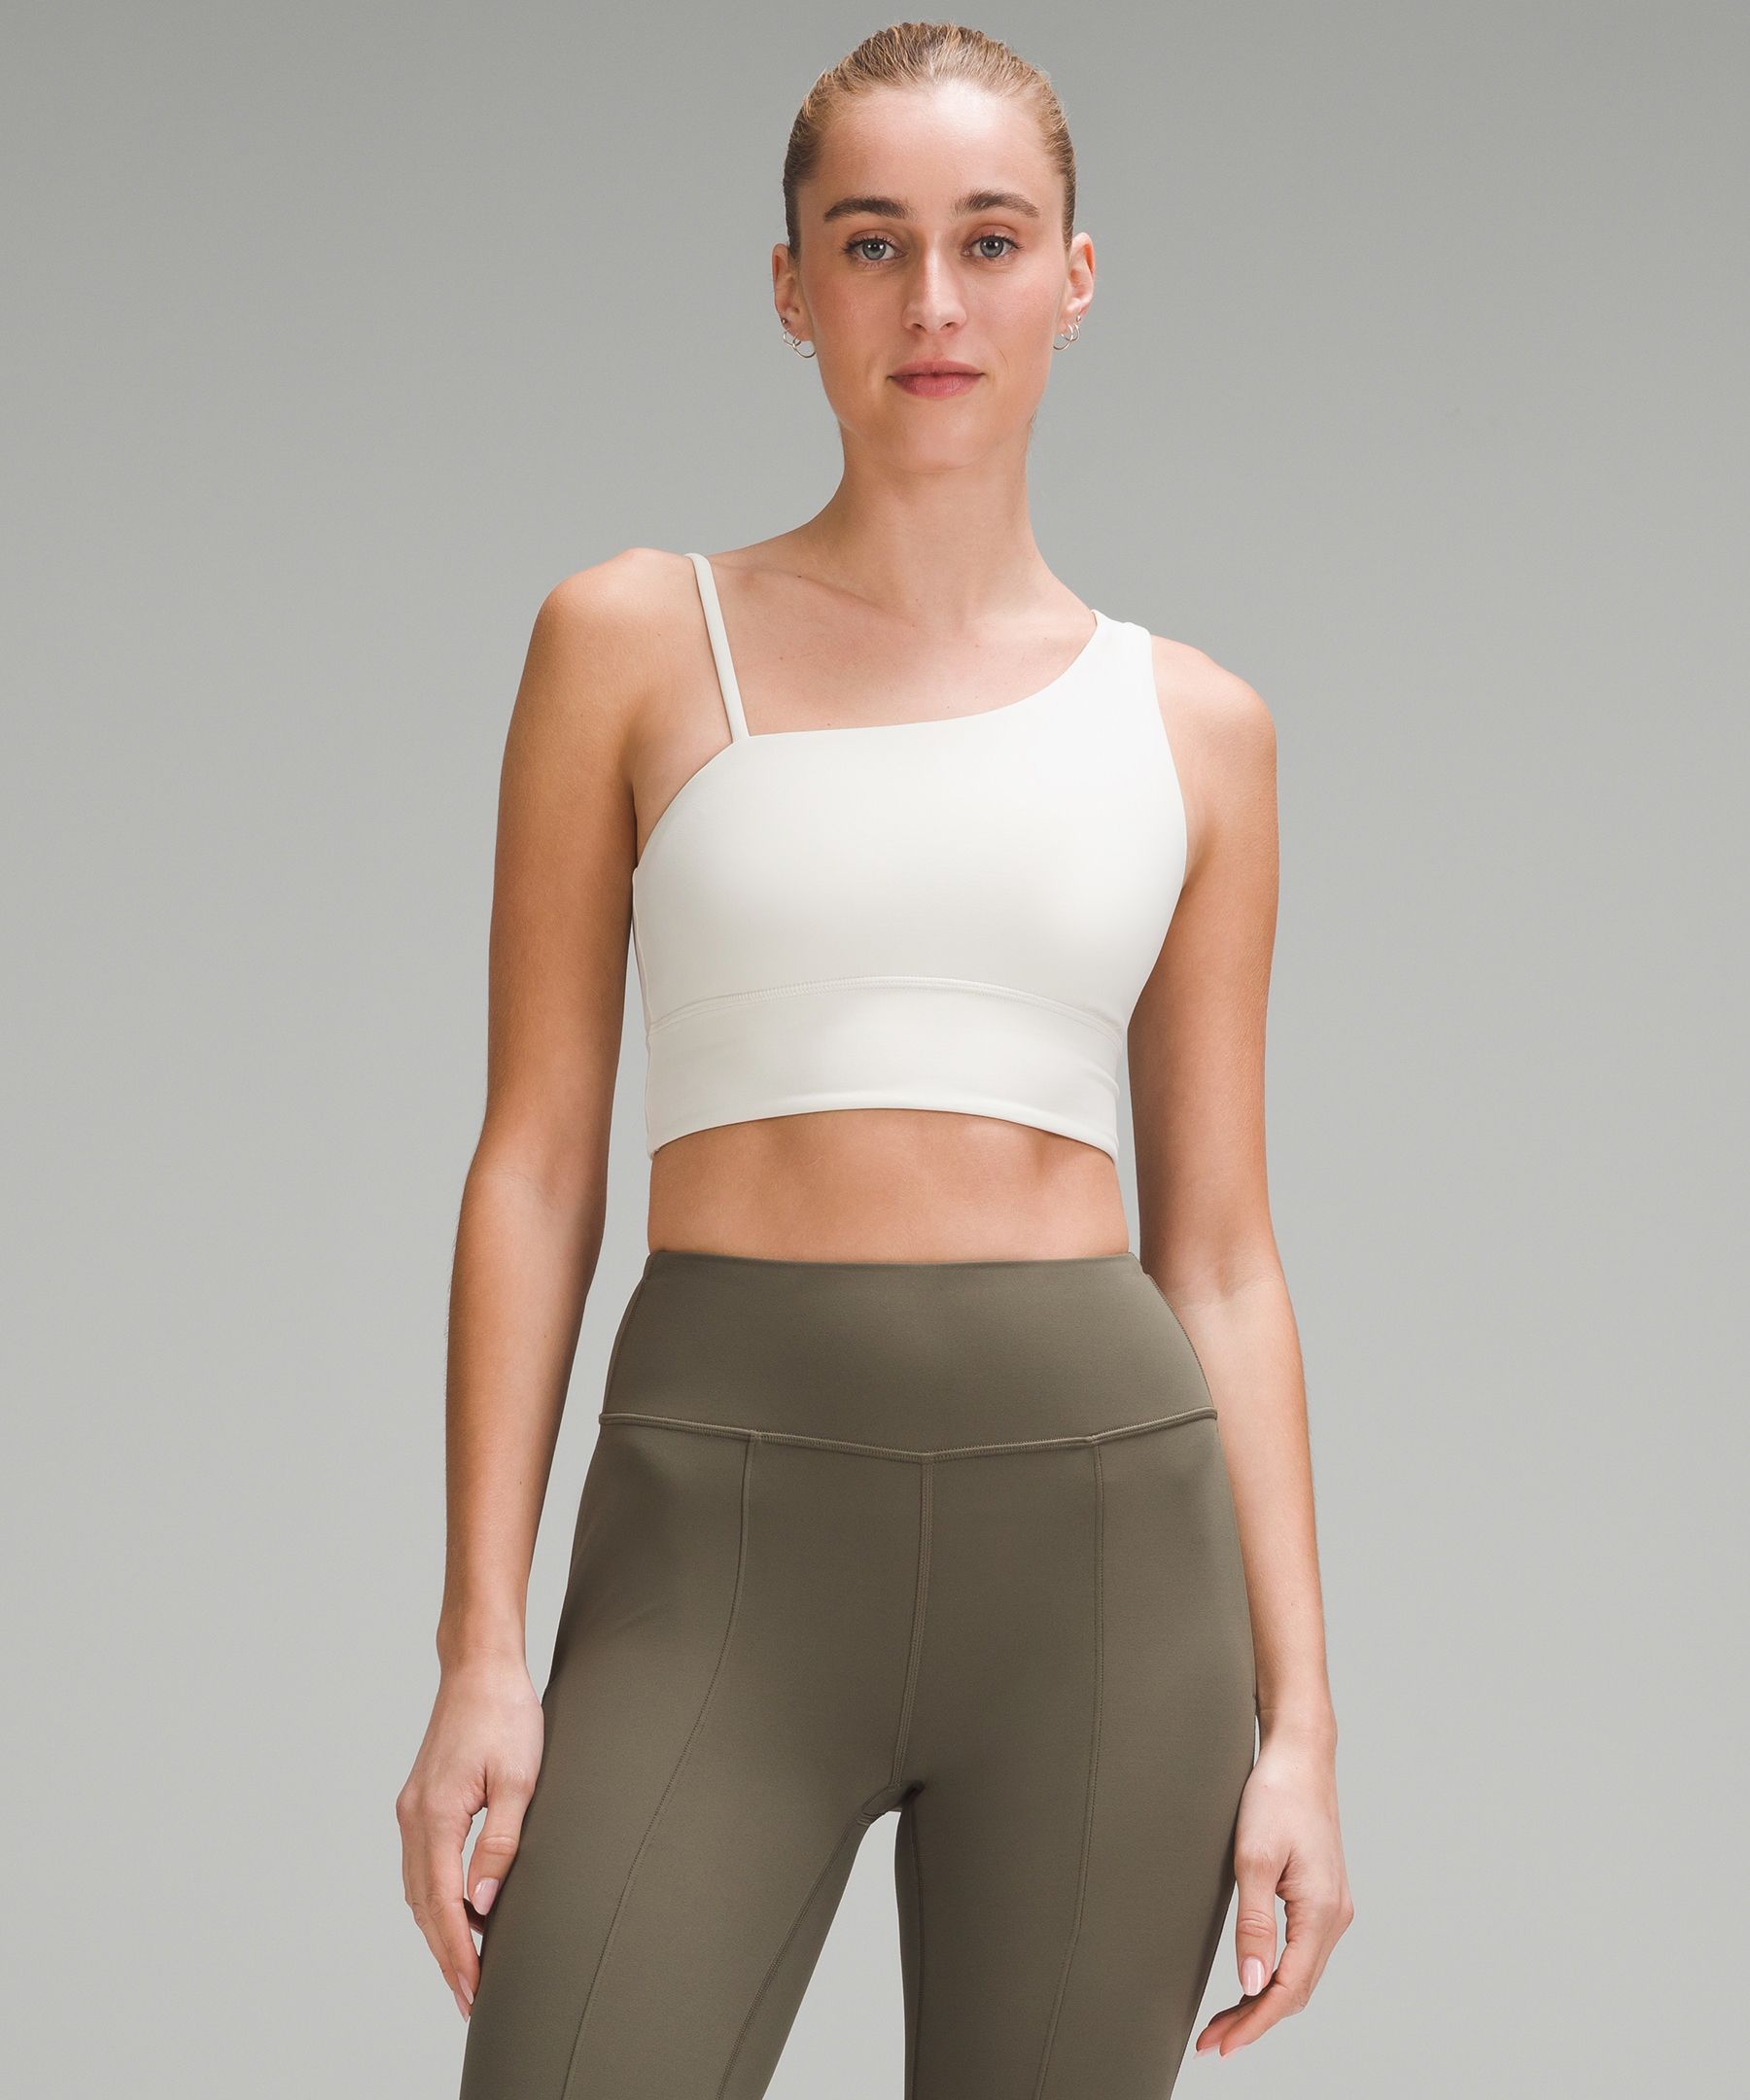 lululemon Australia and New Zealand - Lightweight, buttery-soft Nulu™ fabric  and a hue that is multi-seasonal –meet the Align Pant in 'Dark Carbon':  bit.ly/2xahukw